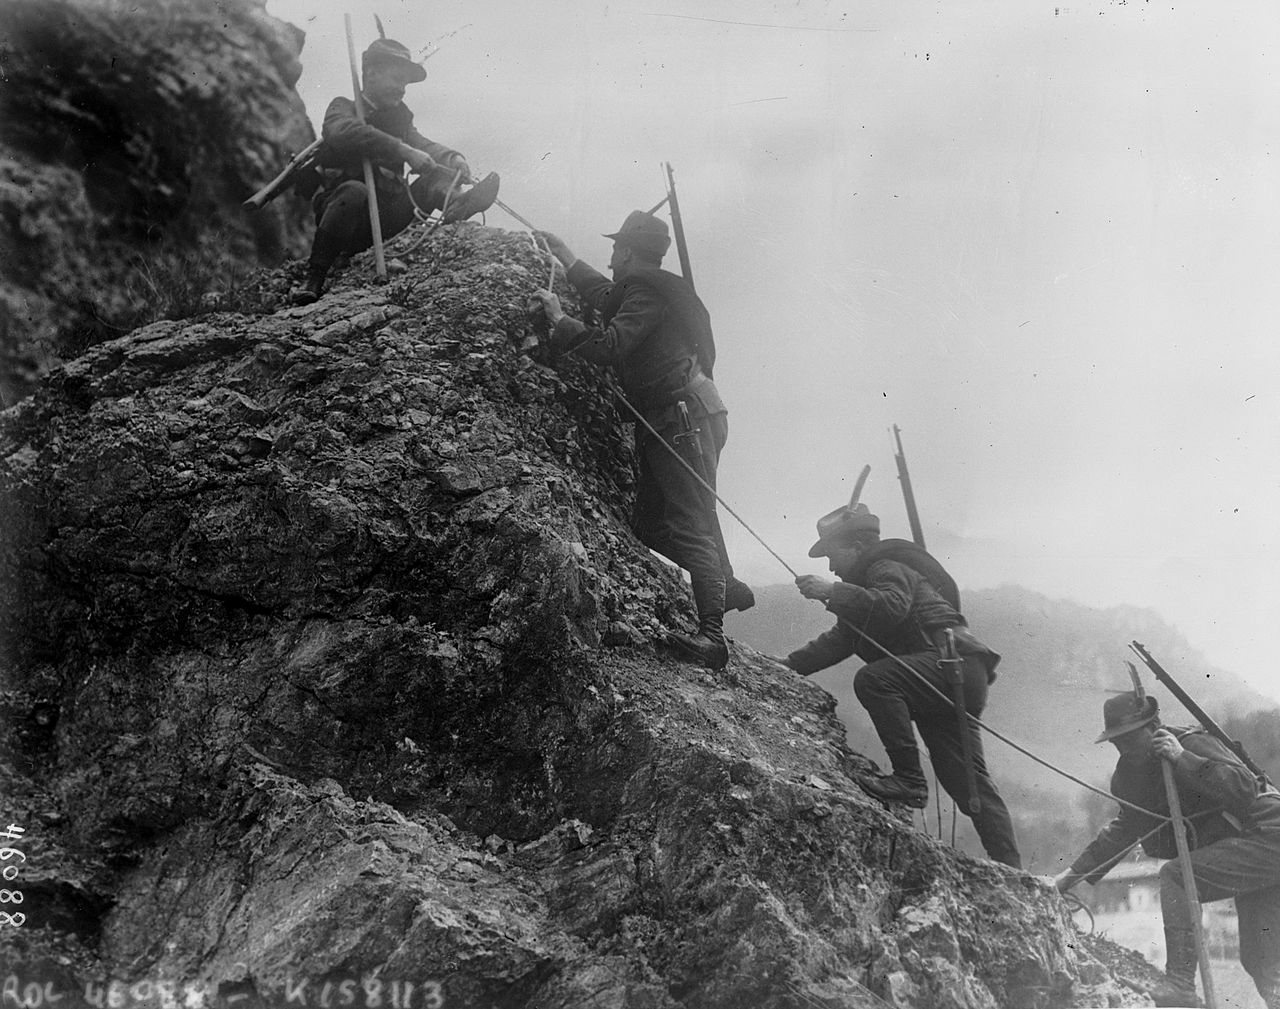 Italian alpine troops in action during World War I